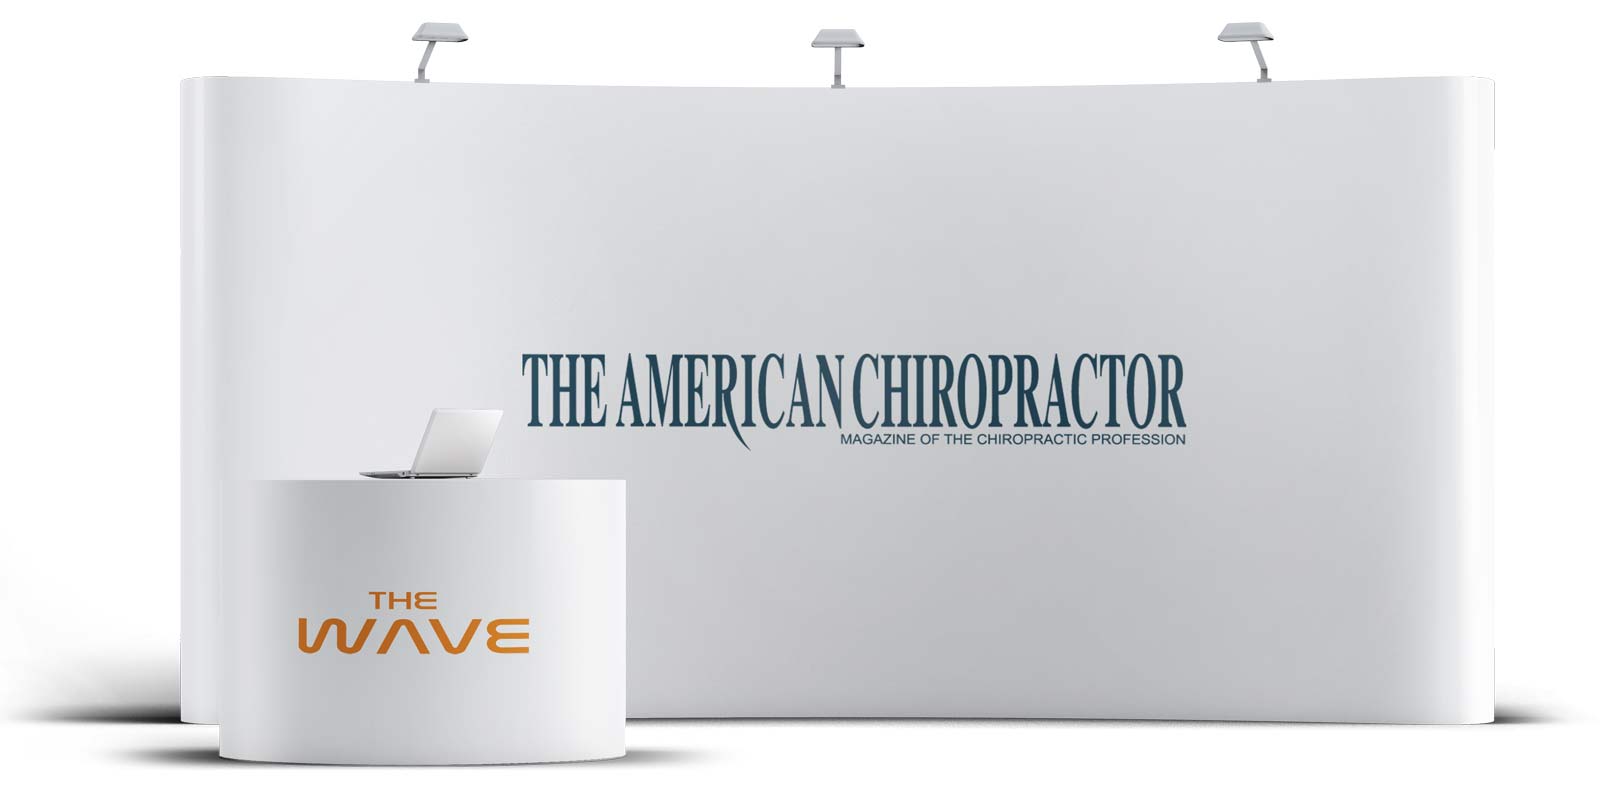 The American Chiropractor - Chiropractic Magazine and Media Sponsor at the WAVE Chiropractic Conference